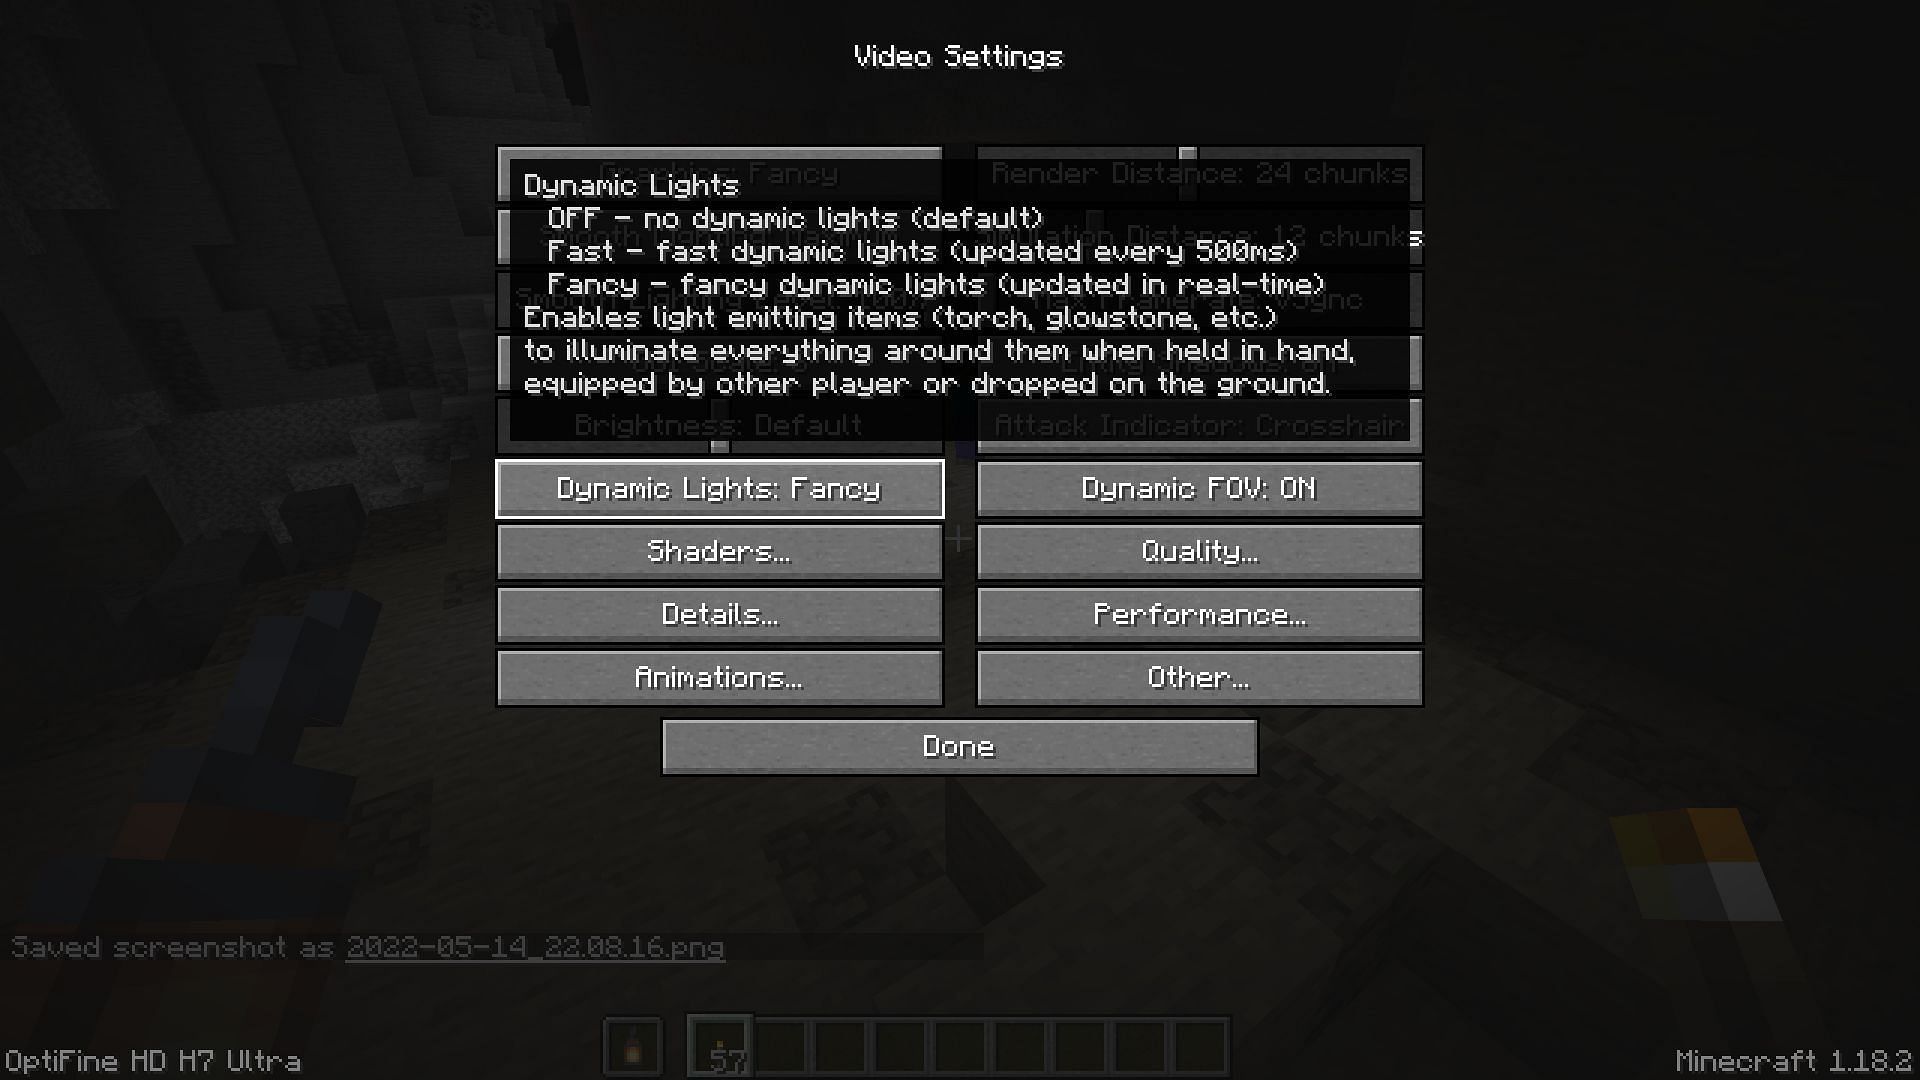 The location of the dynamic lighting setting in the video settings menu (Image via Minecraft)